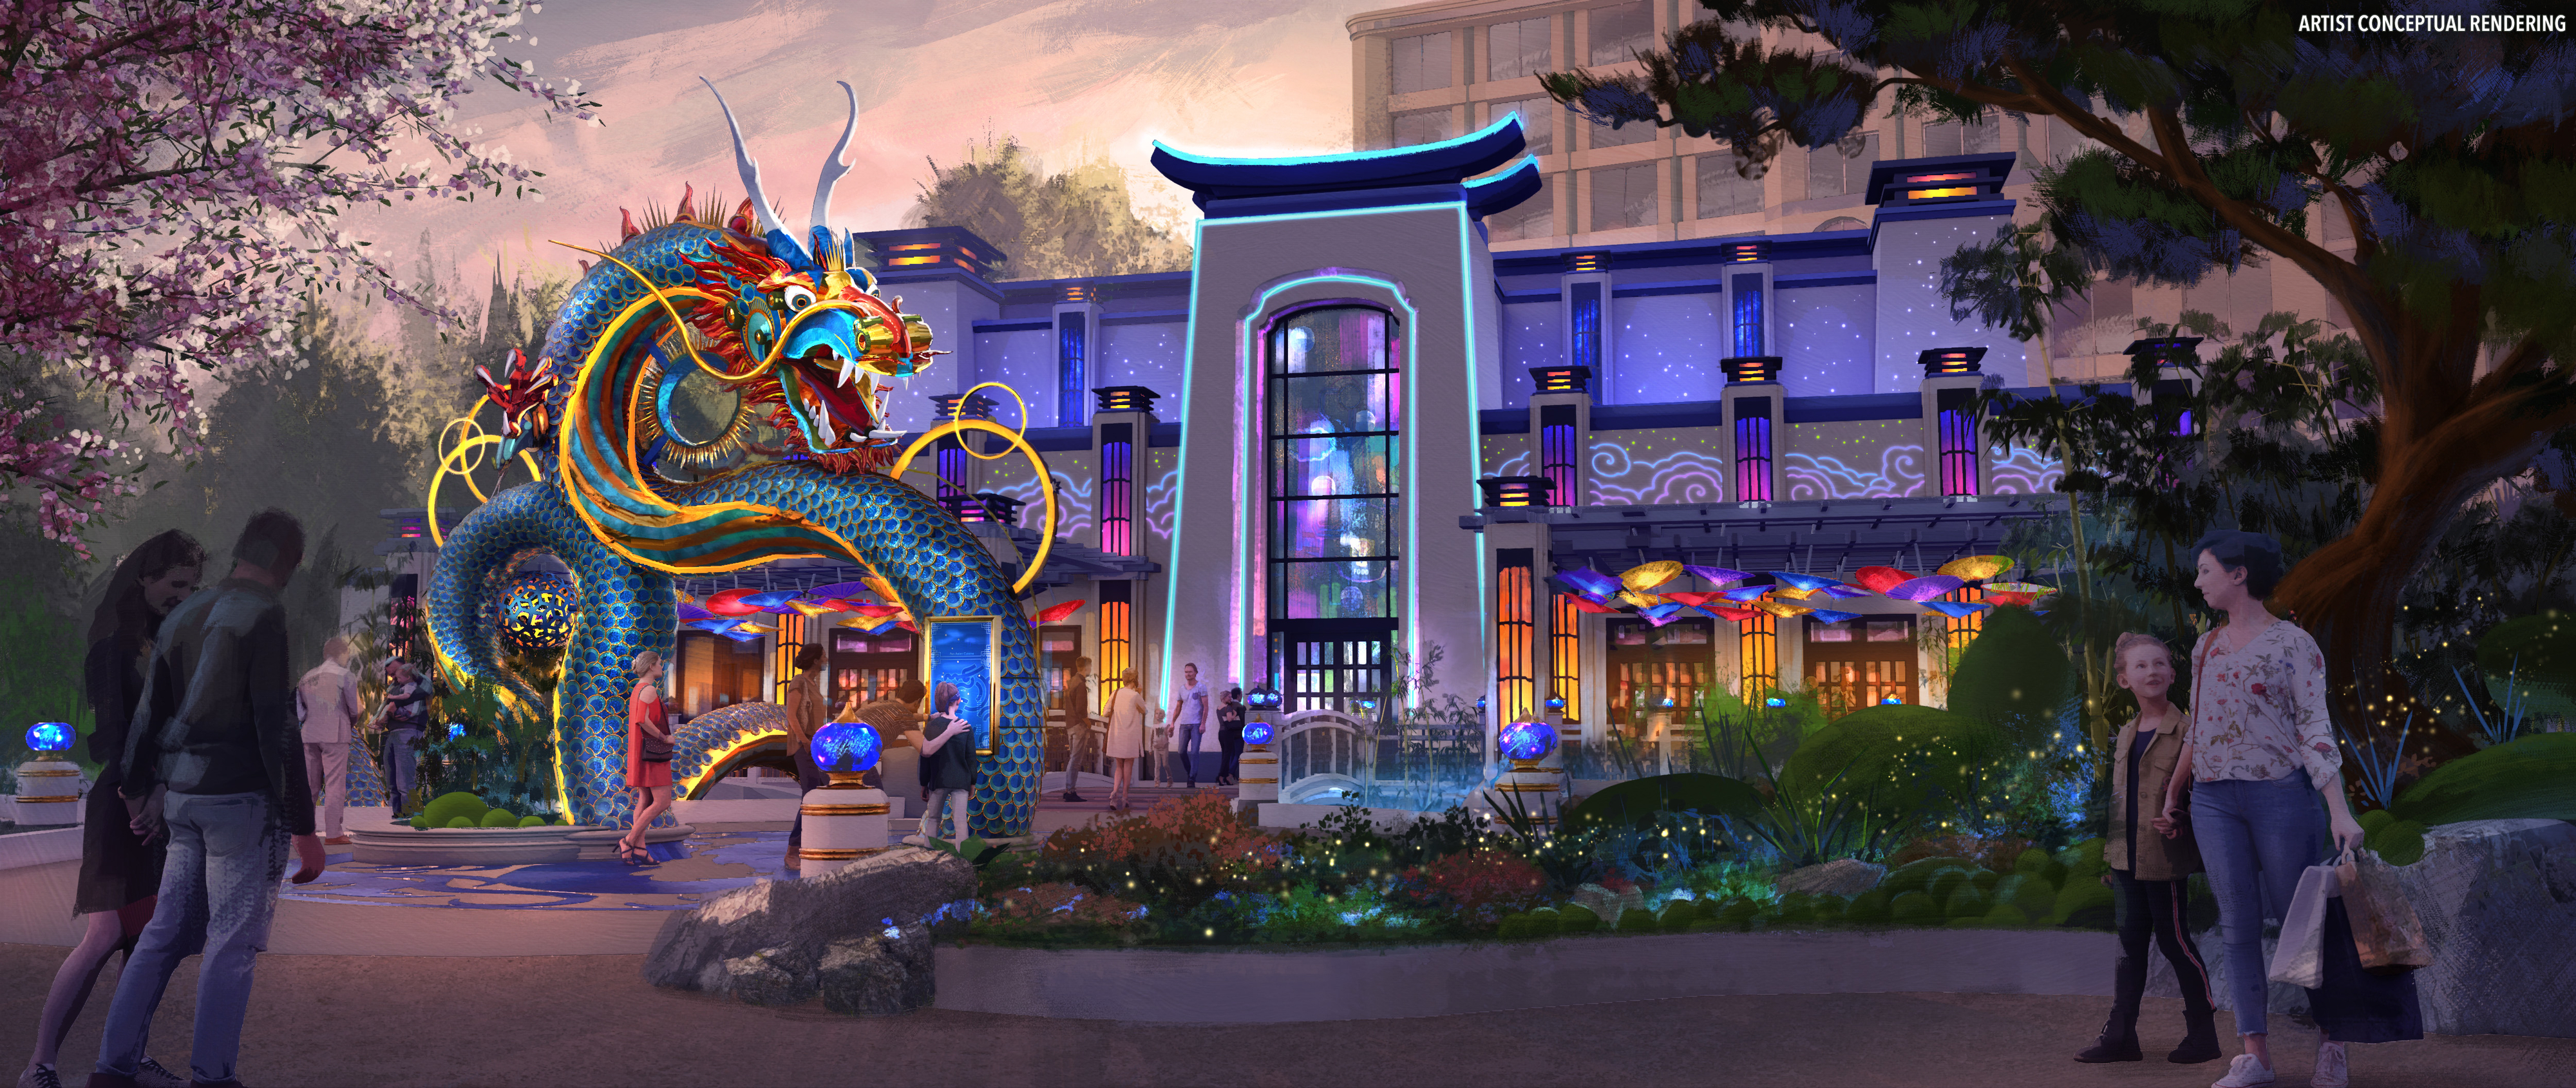 Rendering of Celestial Park featuring a statue of a dragon